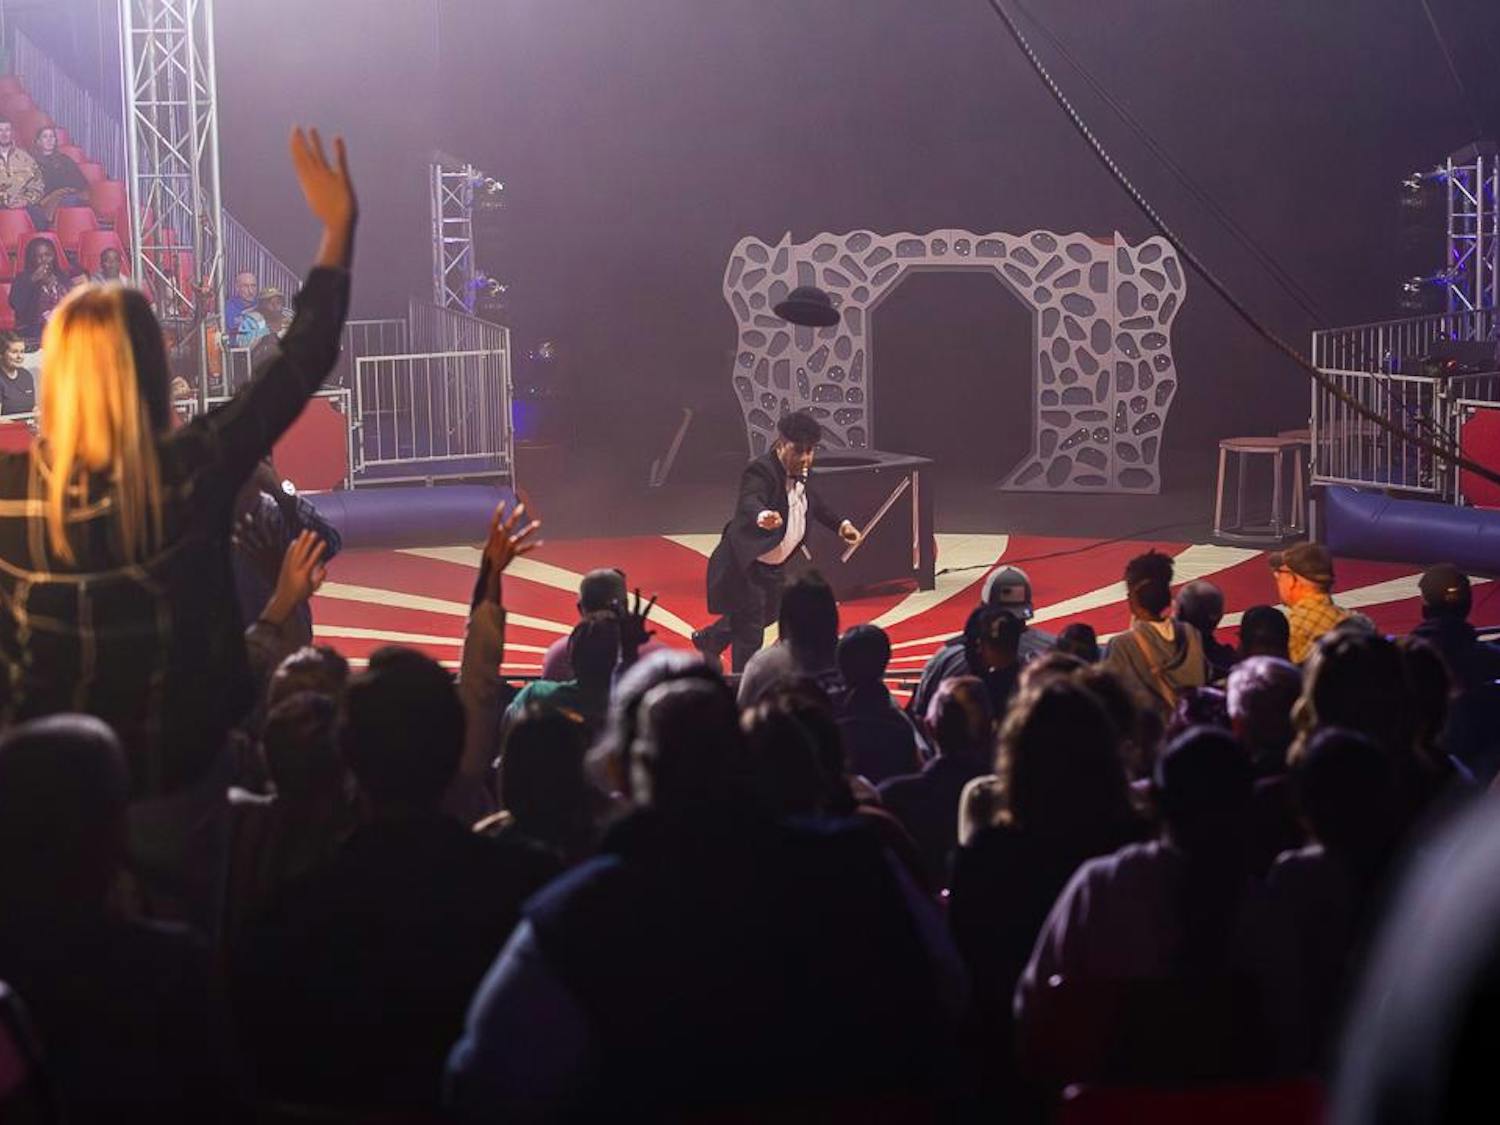 Renaldo the Clown throws his bowler hat to an audience member prior to the 7:30 p.m. showing of the CIRCUS at the Fair on Oct. 18, 2023. Renaldo performed in between acts to provide comic relief and entertain the audience while circus members prepared for upcoming acts.